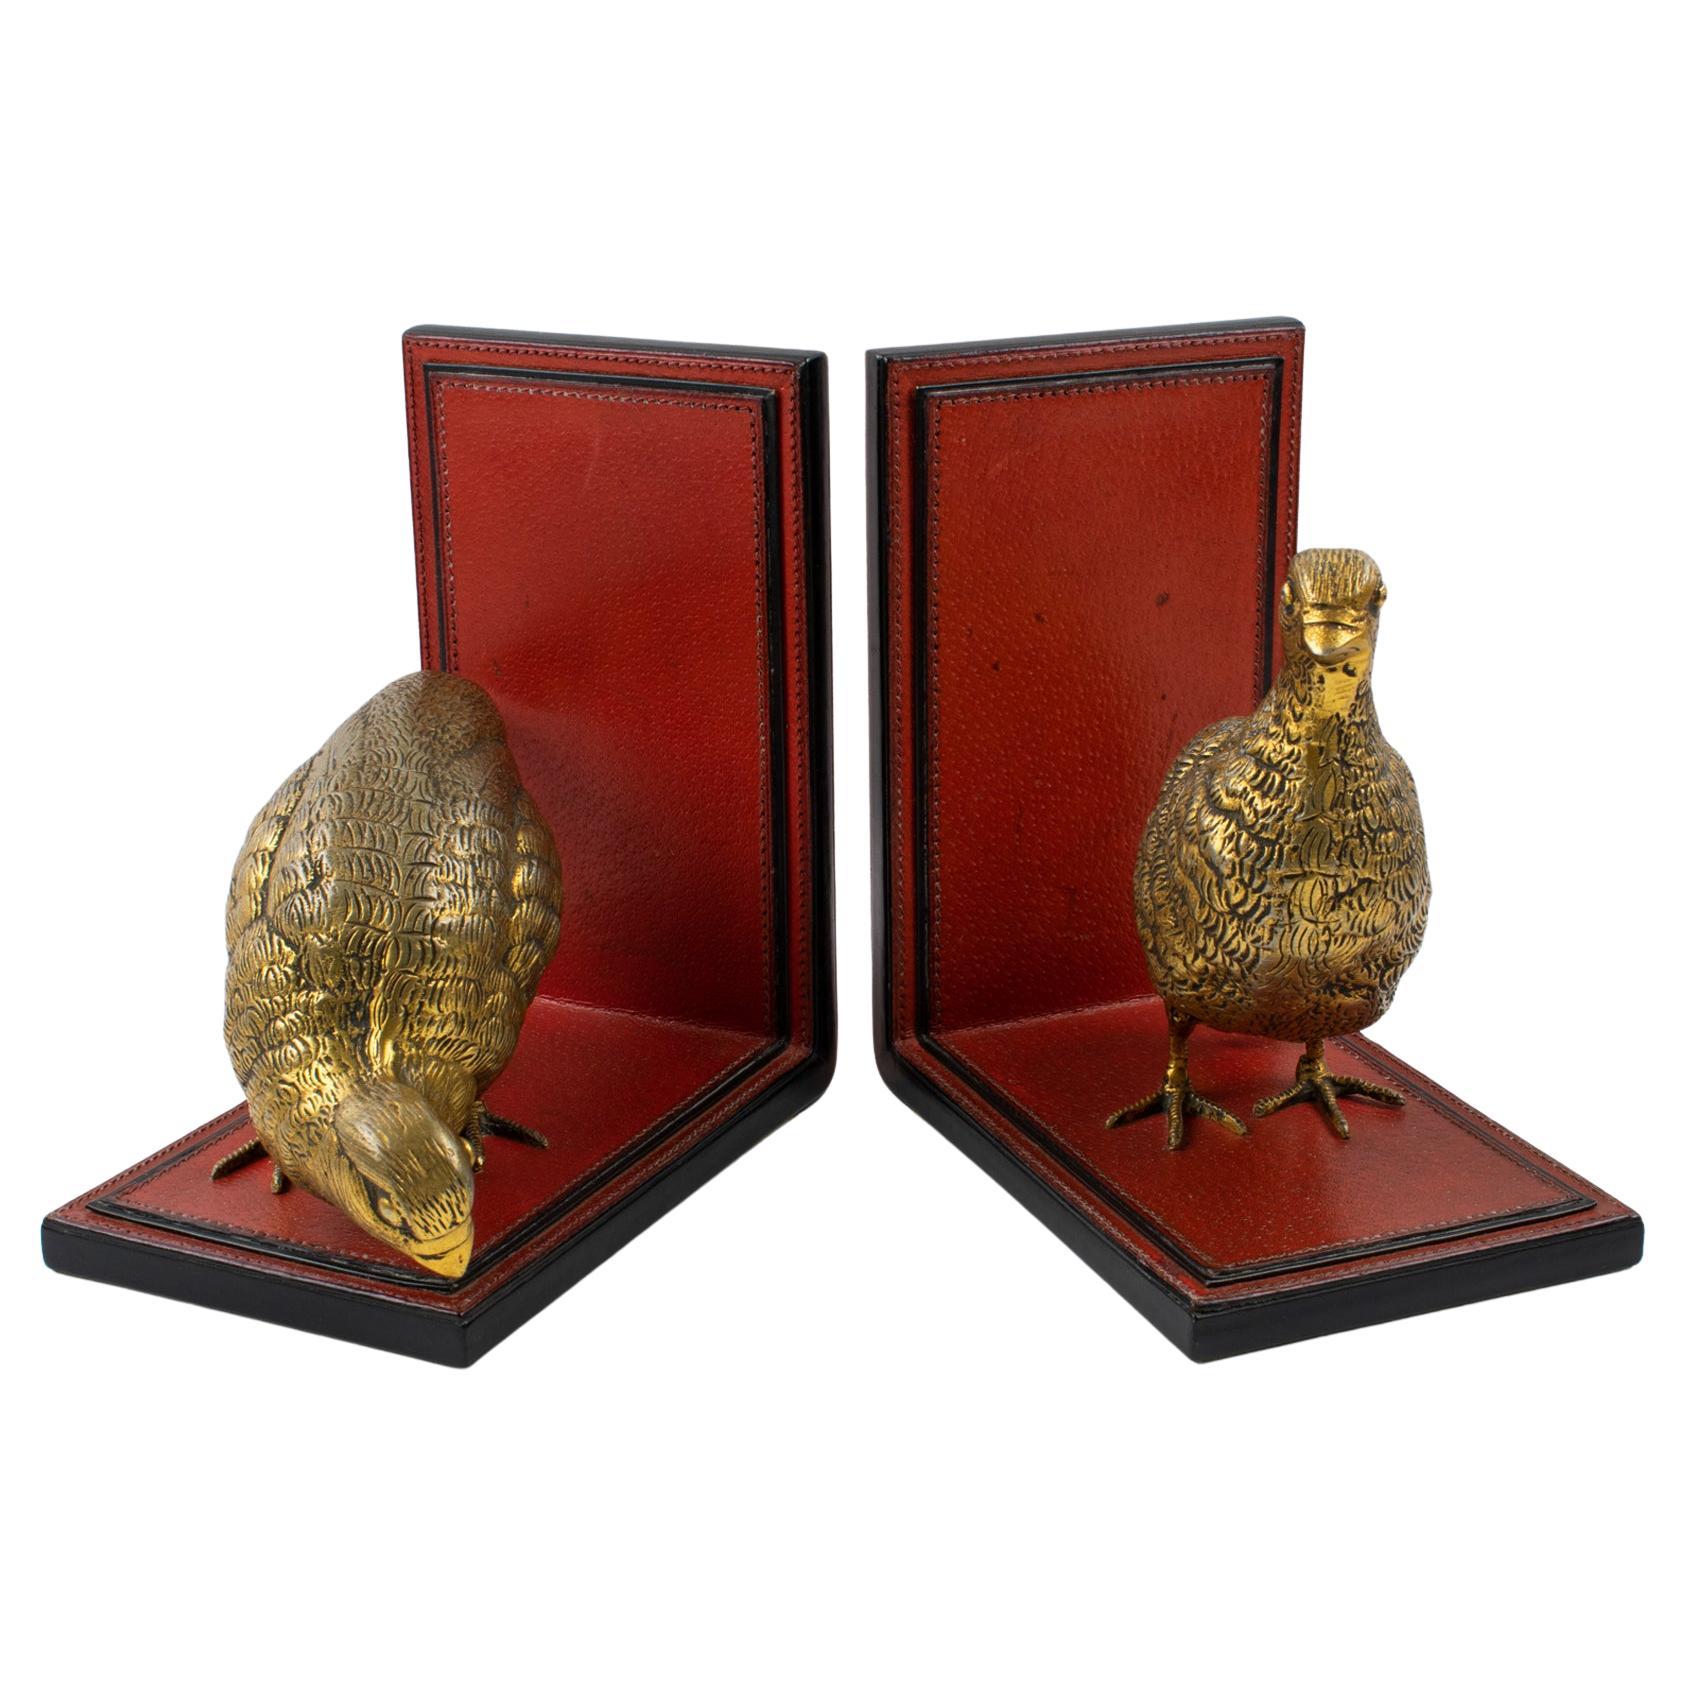 Gucci Italy Hand-Stitched Red Leather Bookends with Gilt Metal Partridges, 1970s